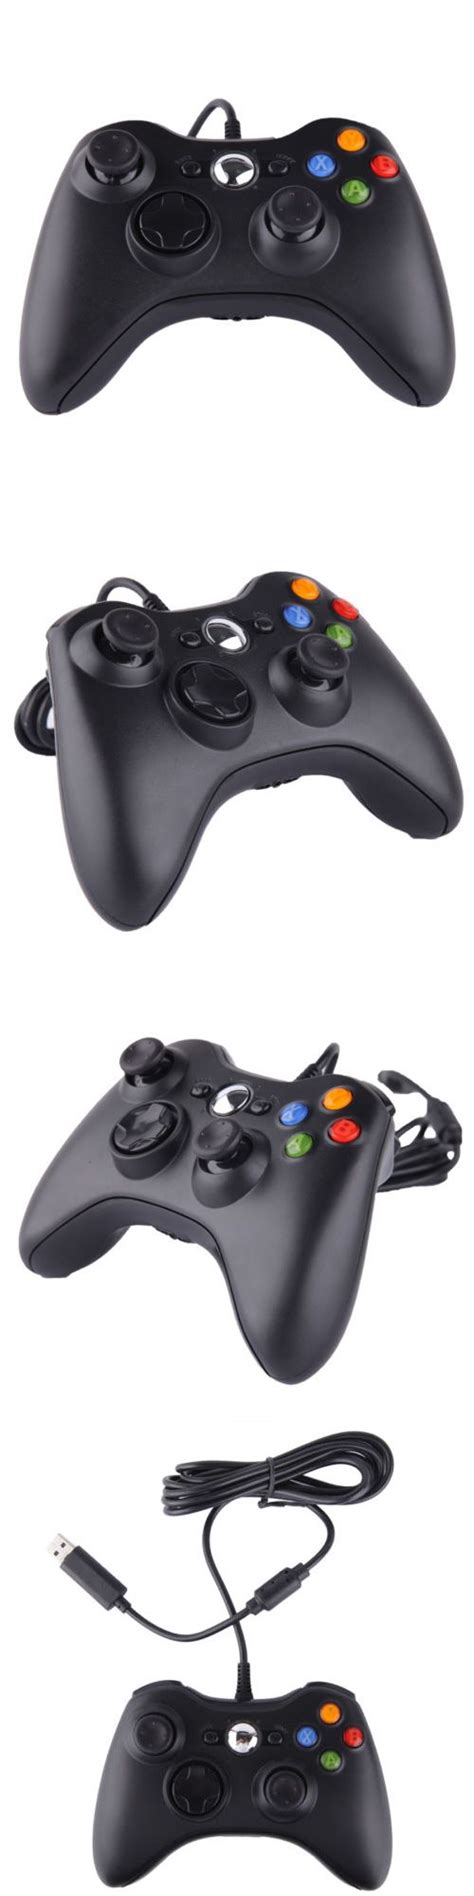 Black Usb Wired Dual Shock Gamepad Game Controllers For Microsoft Xbox